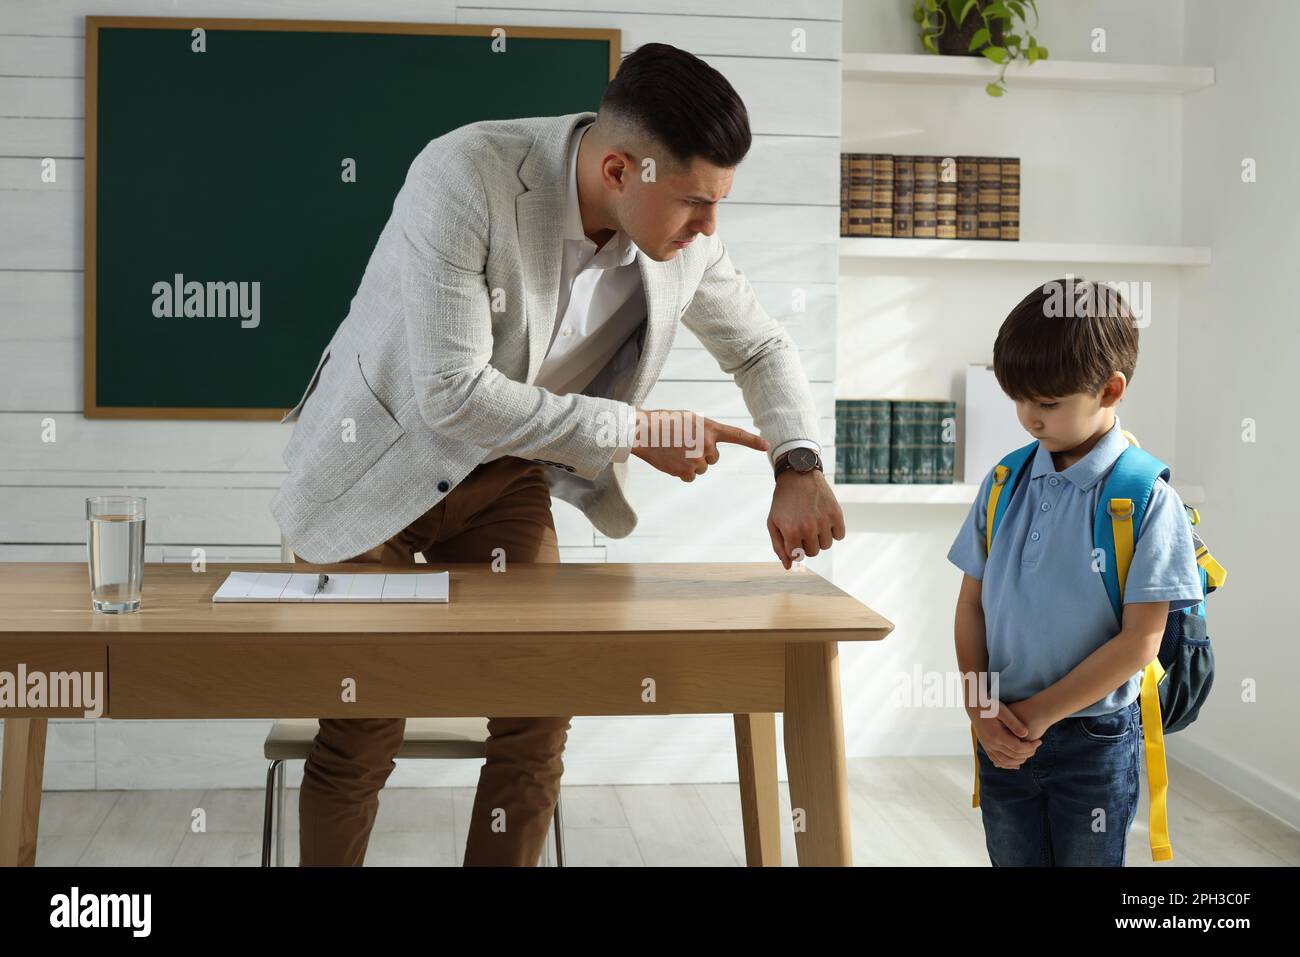 Teacher pointing on wrist watch while scolding pupil for being late in classroom Stock Photo